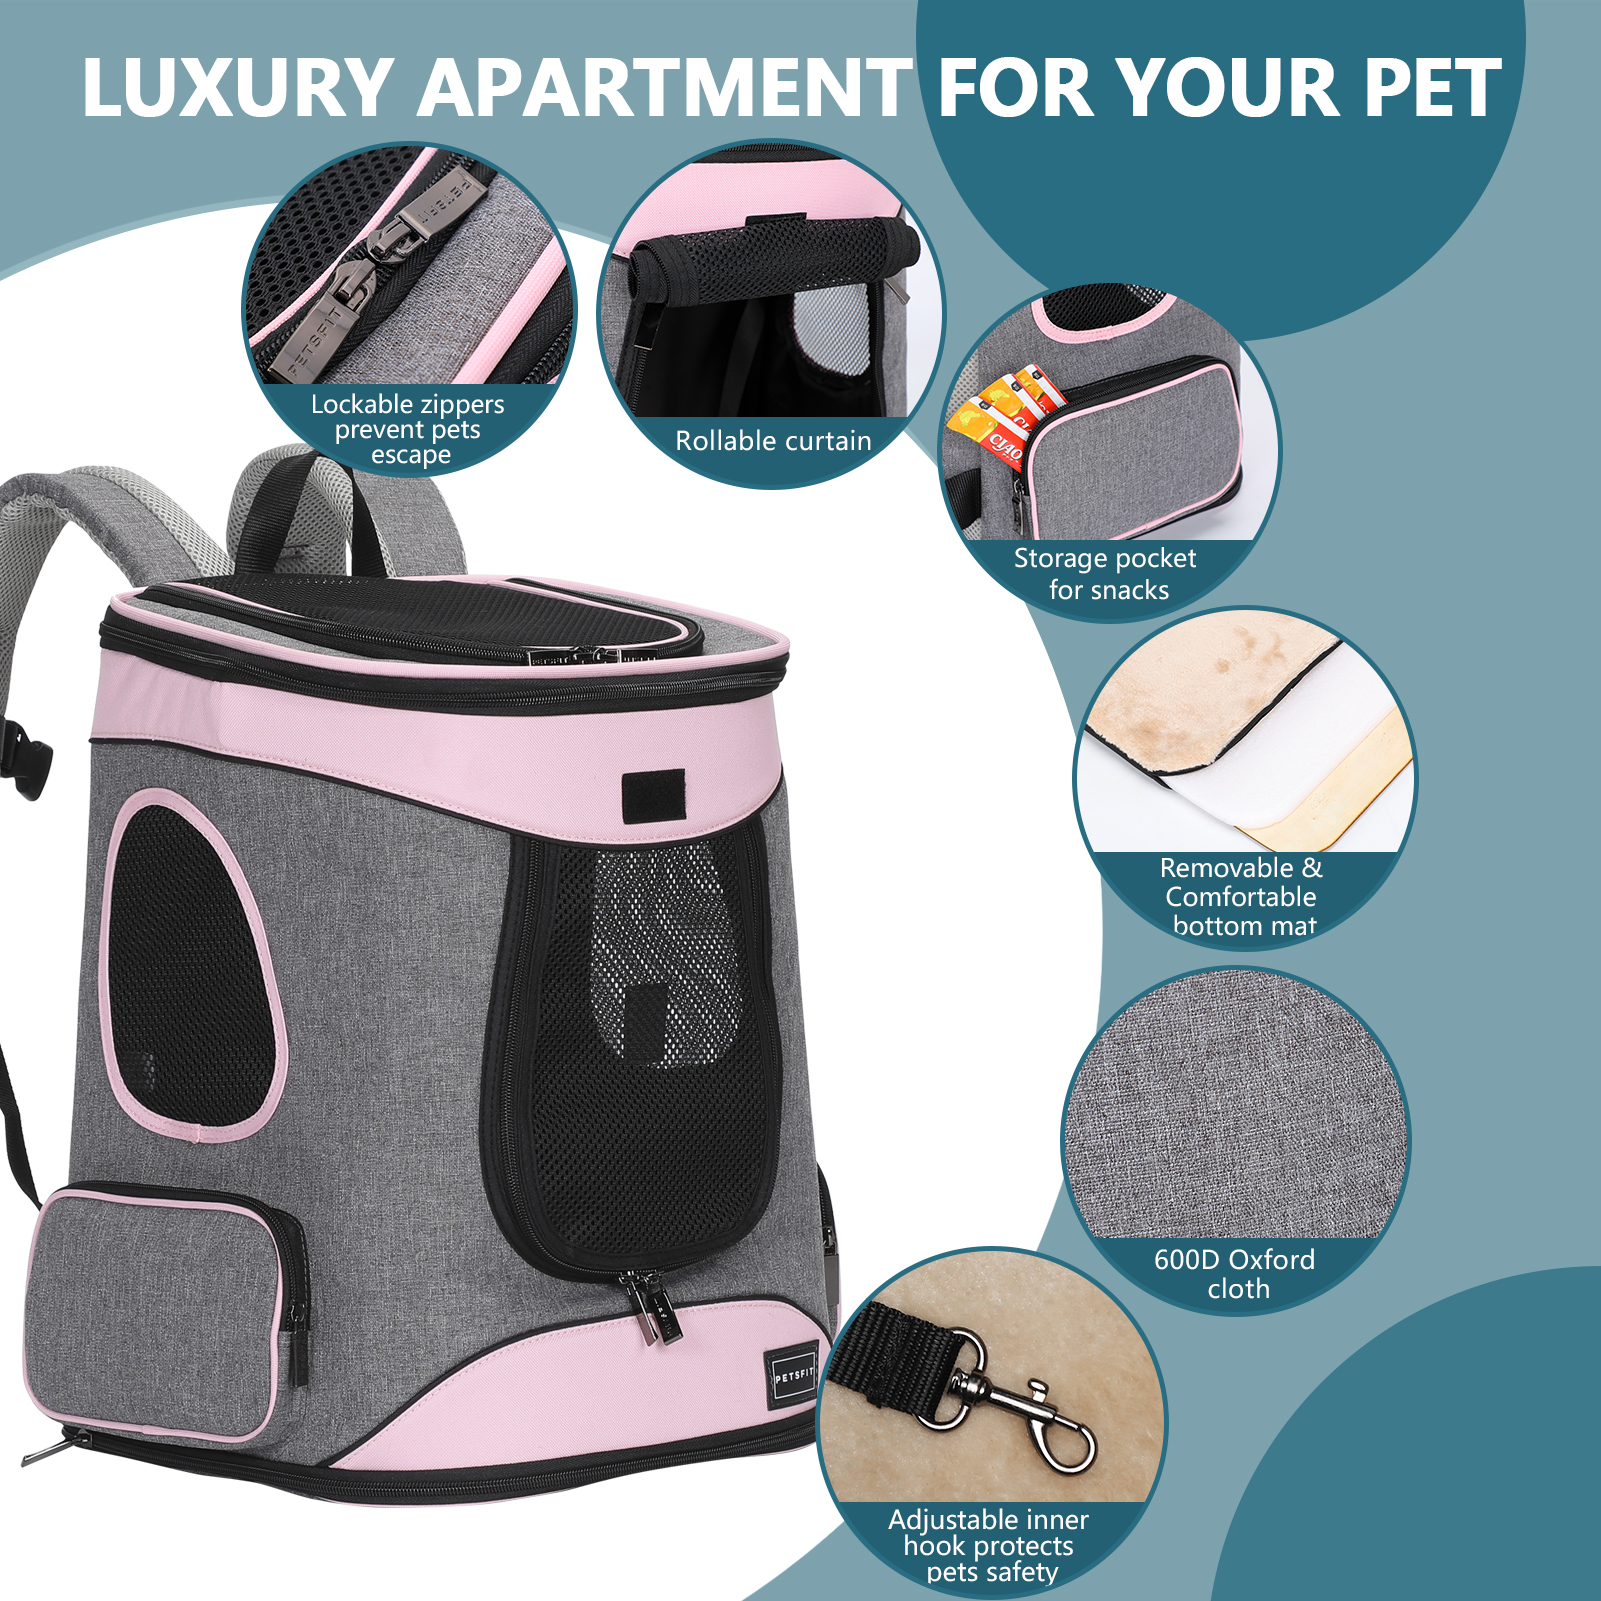 US$ 63.69 - Petsfit Comfortable Dog Cat Backpack Carrier | for 